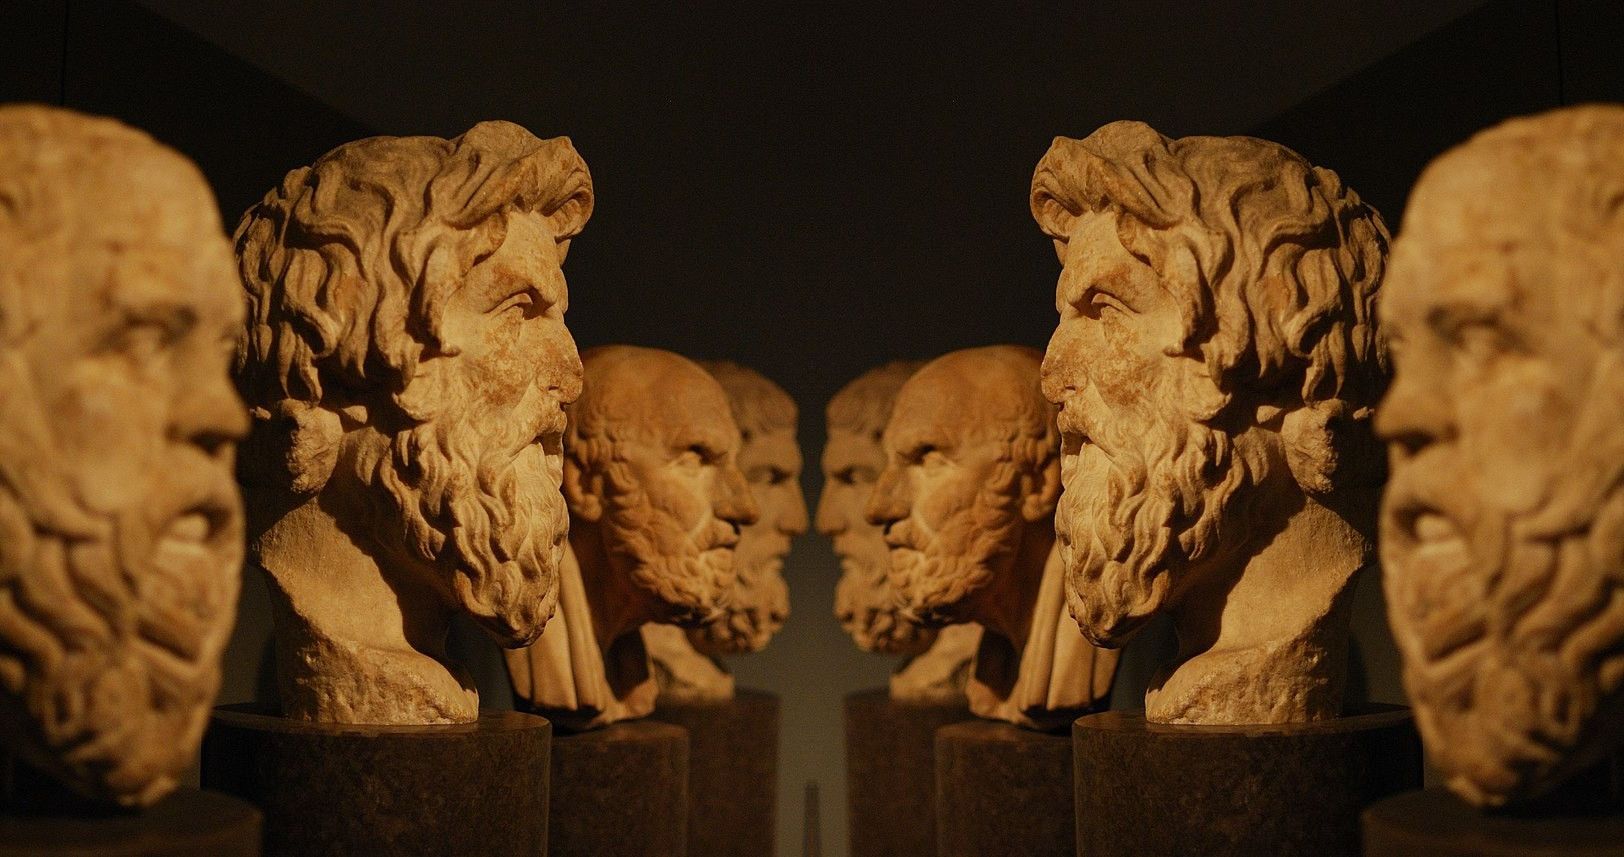 A row of weathered stone busts of ancient Greek philosophers is mirrored across the center, like two teams staring each other down before a fight.